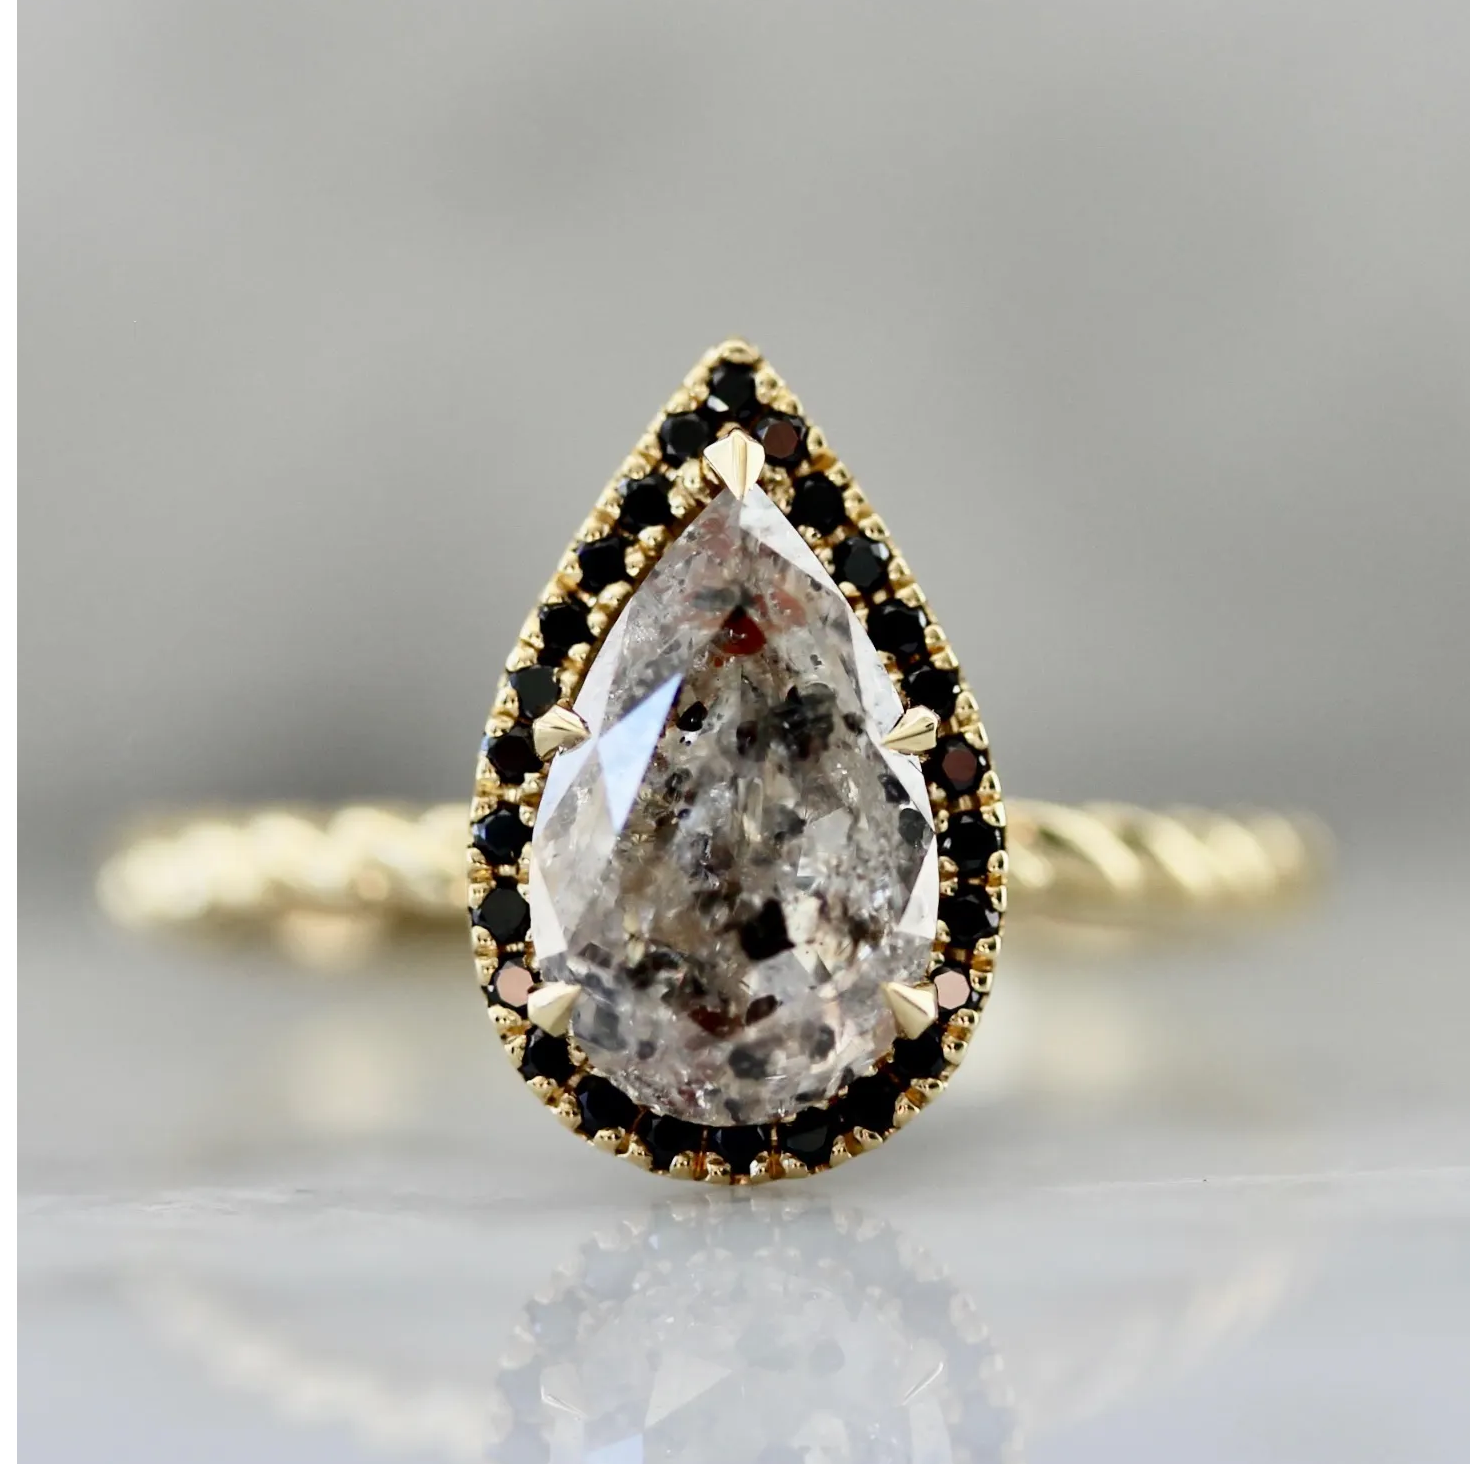 Salt and Pepper Pear Shaped Diamond Ring with Black Diamond Halo 